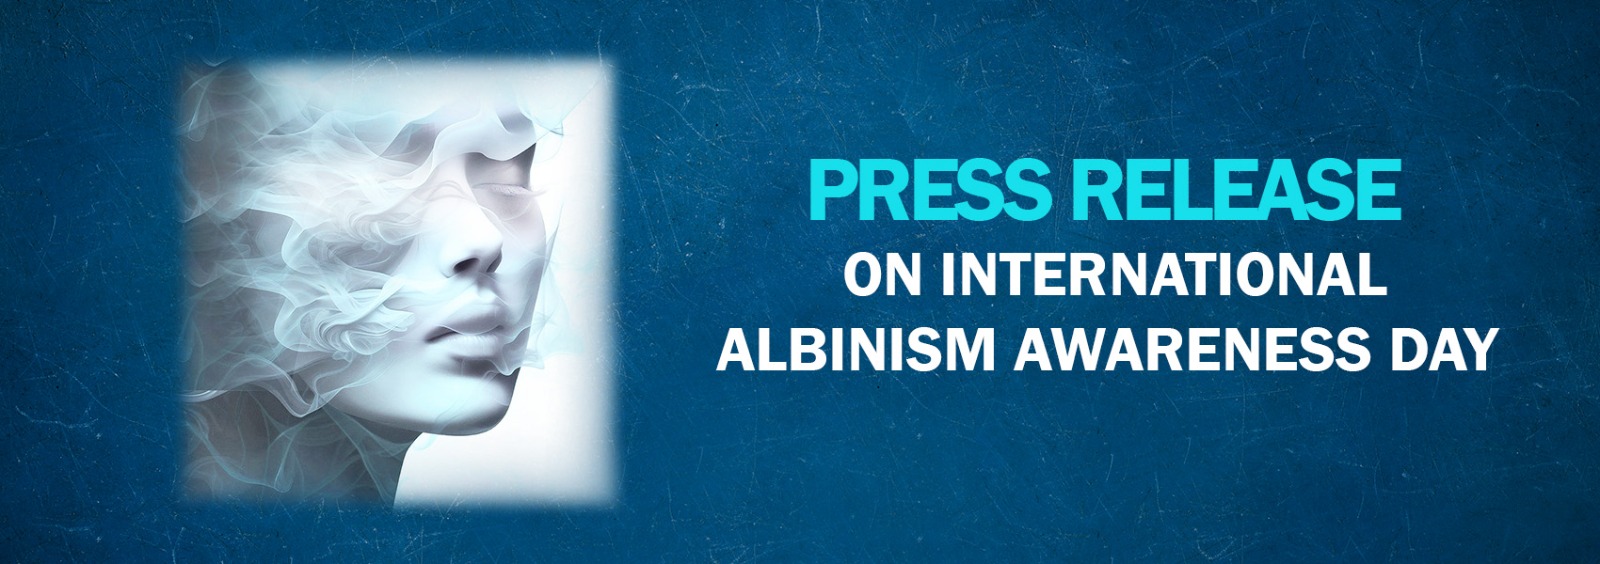 Press Release On International Albinism Awareness Day